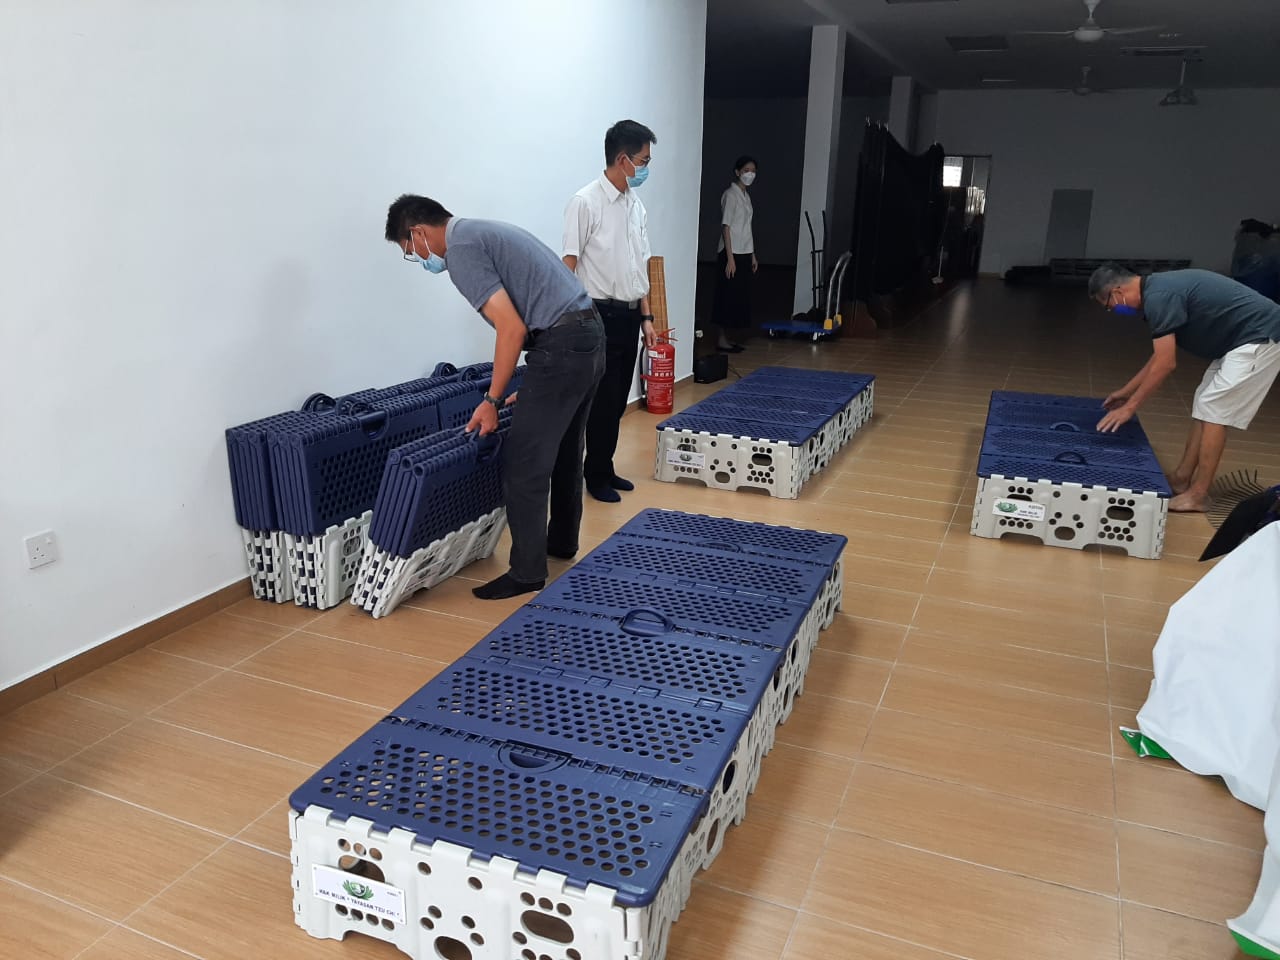 Tzu-Chi group showing SOA members how to install portable bed